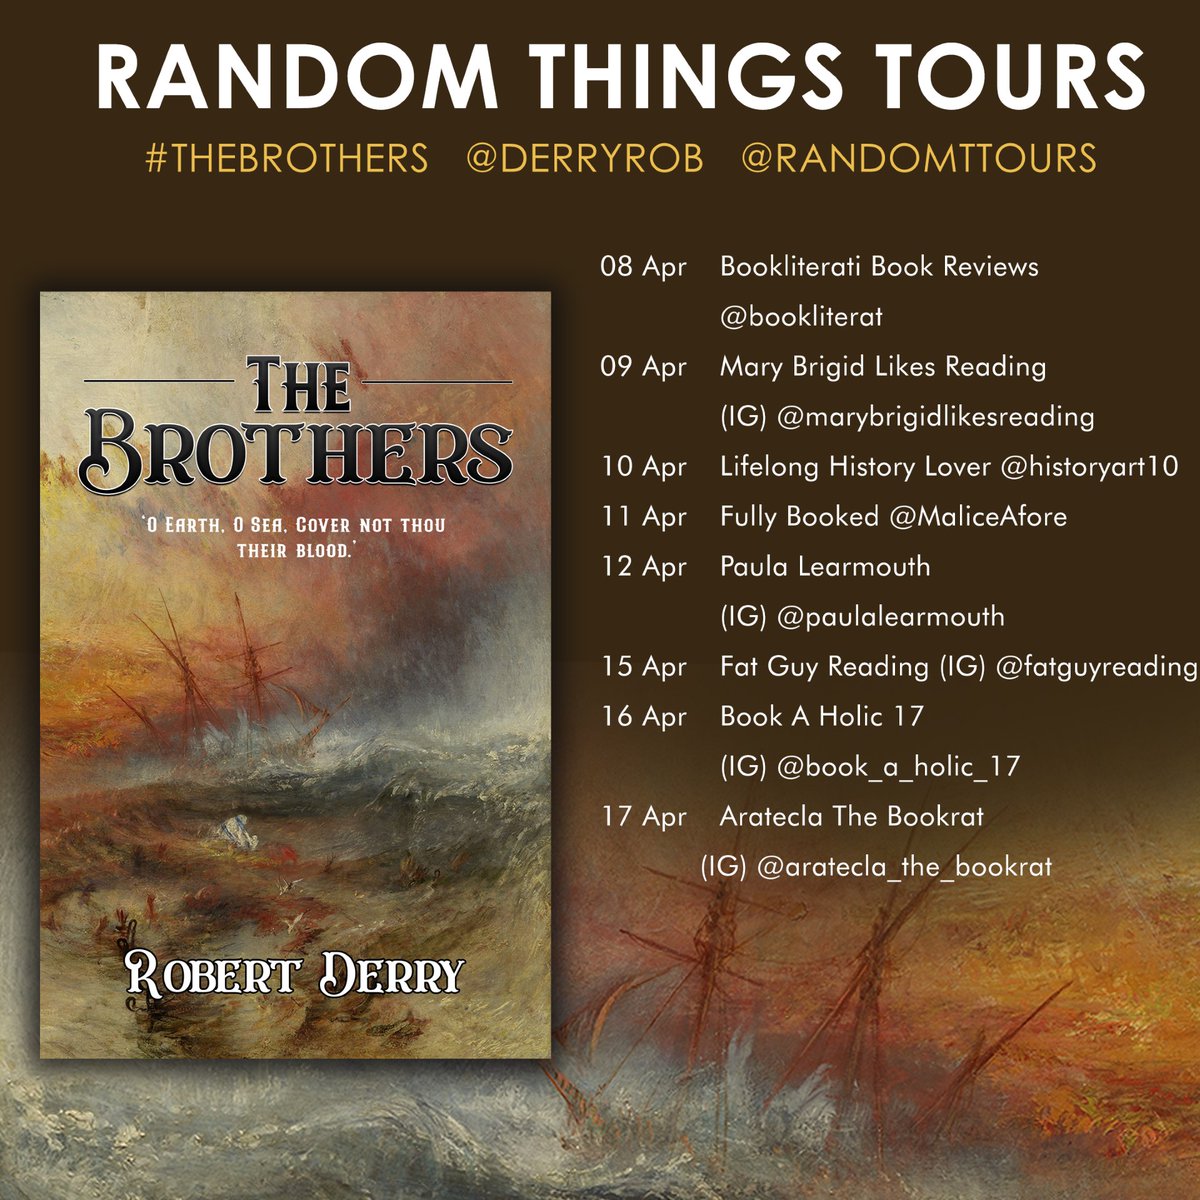 Delighted to organise this #RandomThingsTours Blog Tour for #TheBrothers by #RobertDerry Begins 08 April @historyart10